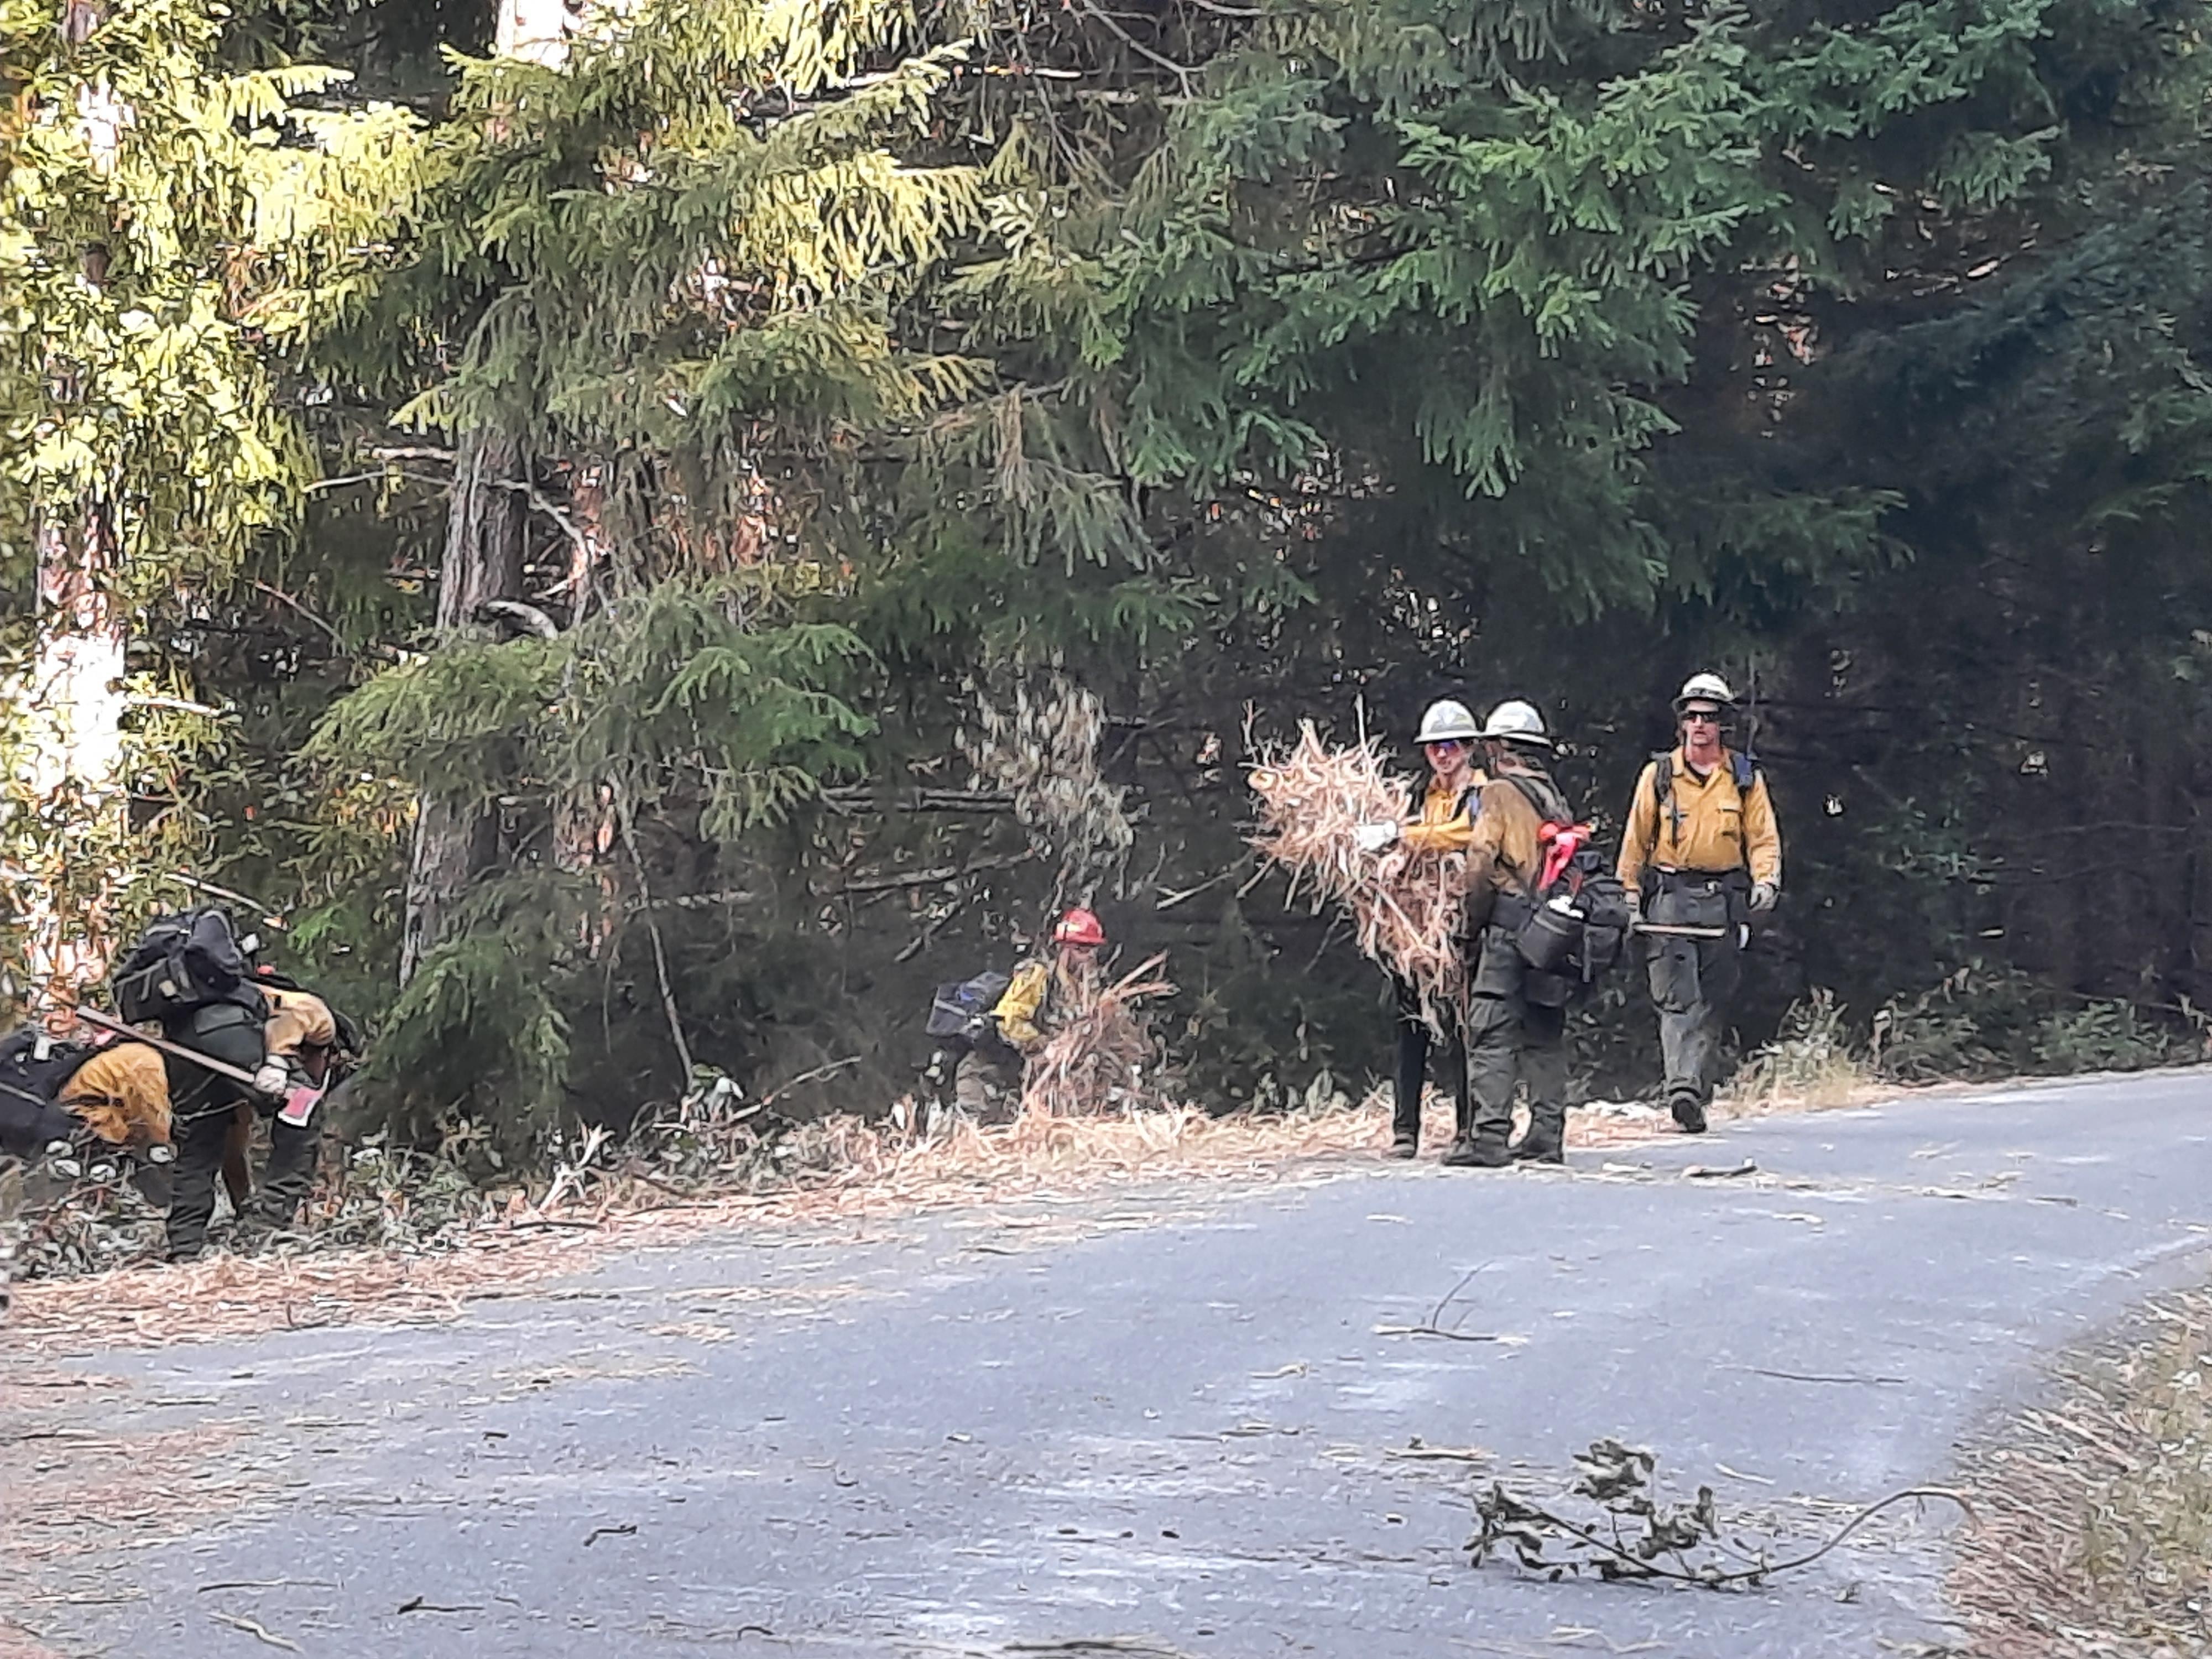 Several individuals in wildfire PPE use hand tools to clear vegetation along a paved road